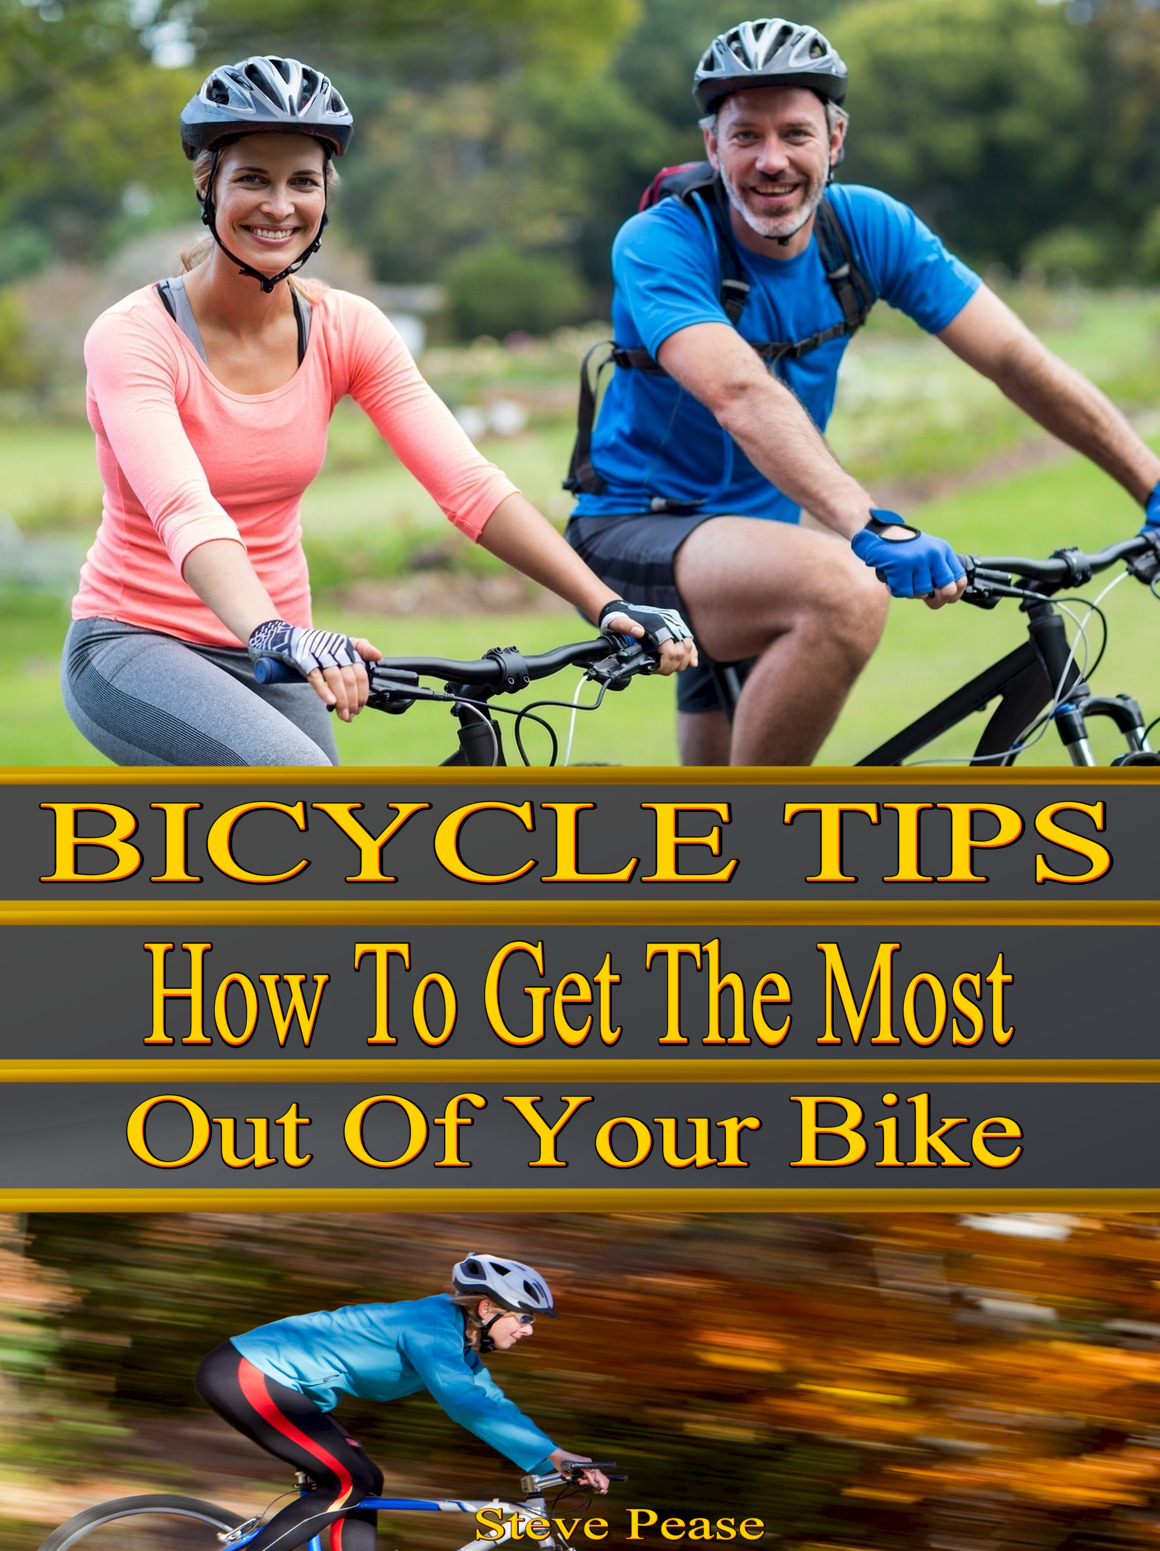 BICYCLING TIPS